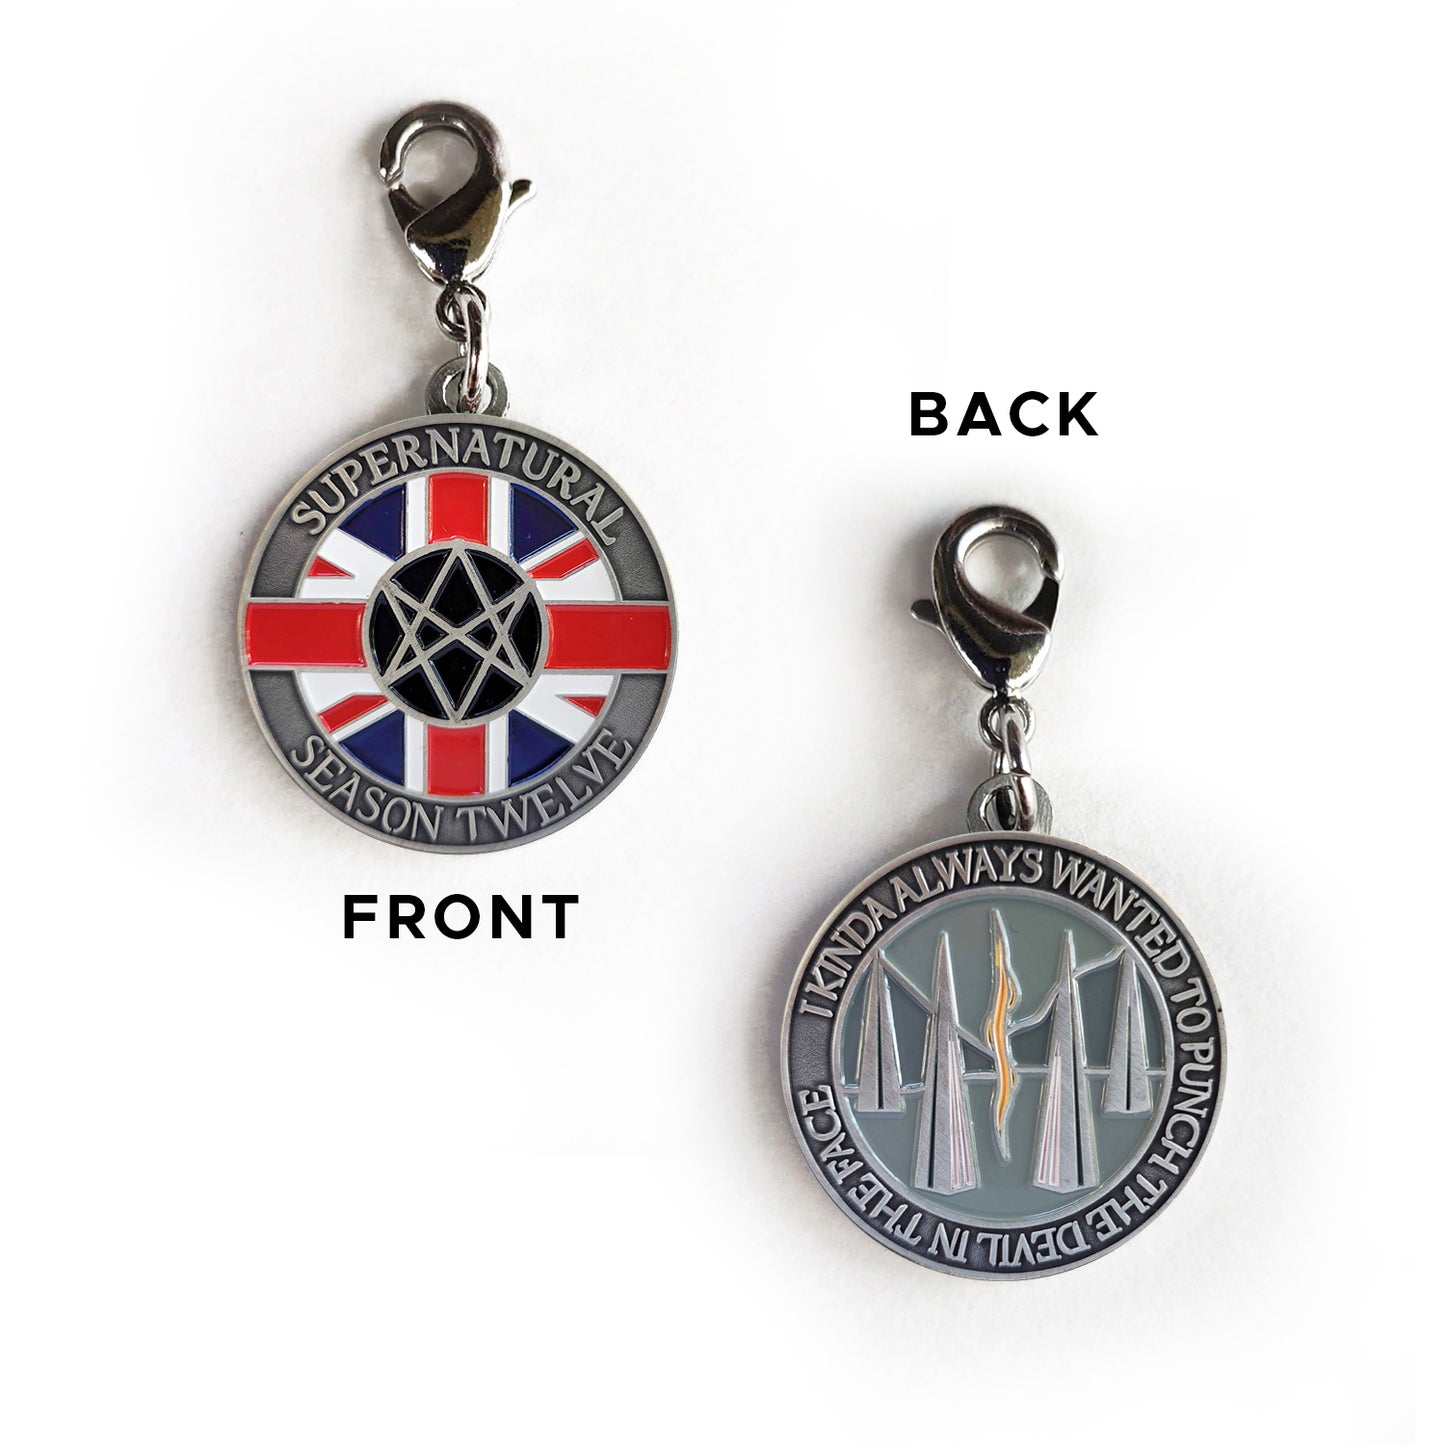 Load image into Gallery viewer, A front and back image of a brass charm. On the front are raised letters around the edge saying “Supernatural season Twelve.” In the middle is a red, white, and blue Union Jack flag, with a Men Of Letters symbol at the center. On the back of the coin are raised letters around the edge saying “I kinda always wanted to punch the devil in the face.” In the middle is are tall triangles rising from a grey background, with a read and yellow line down the center.
